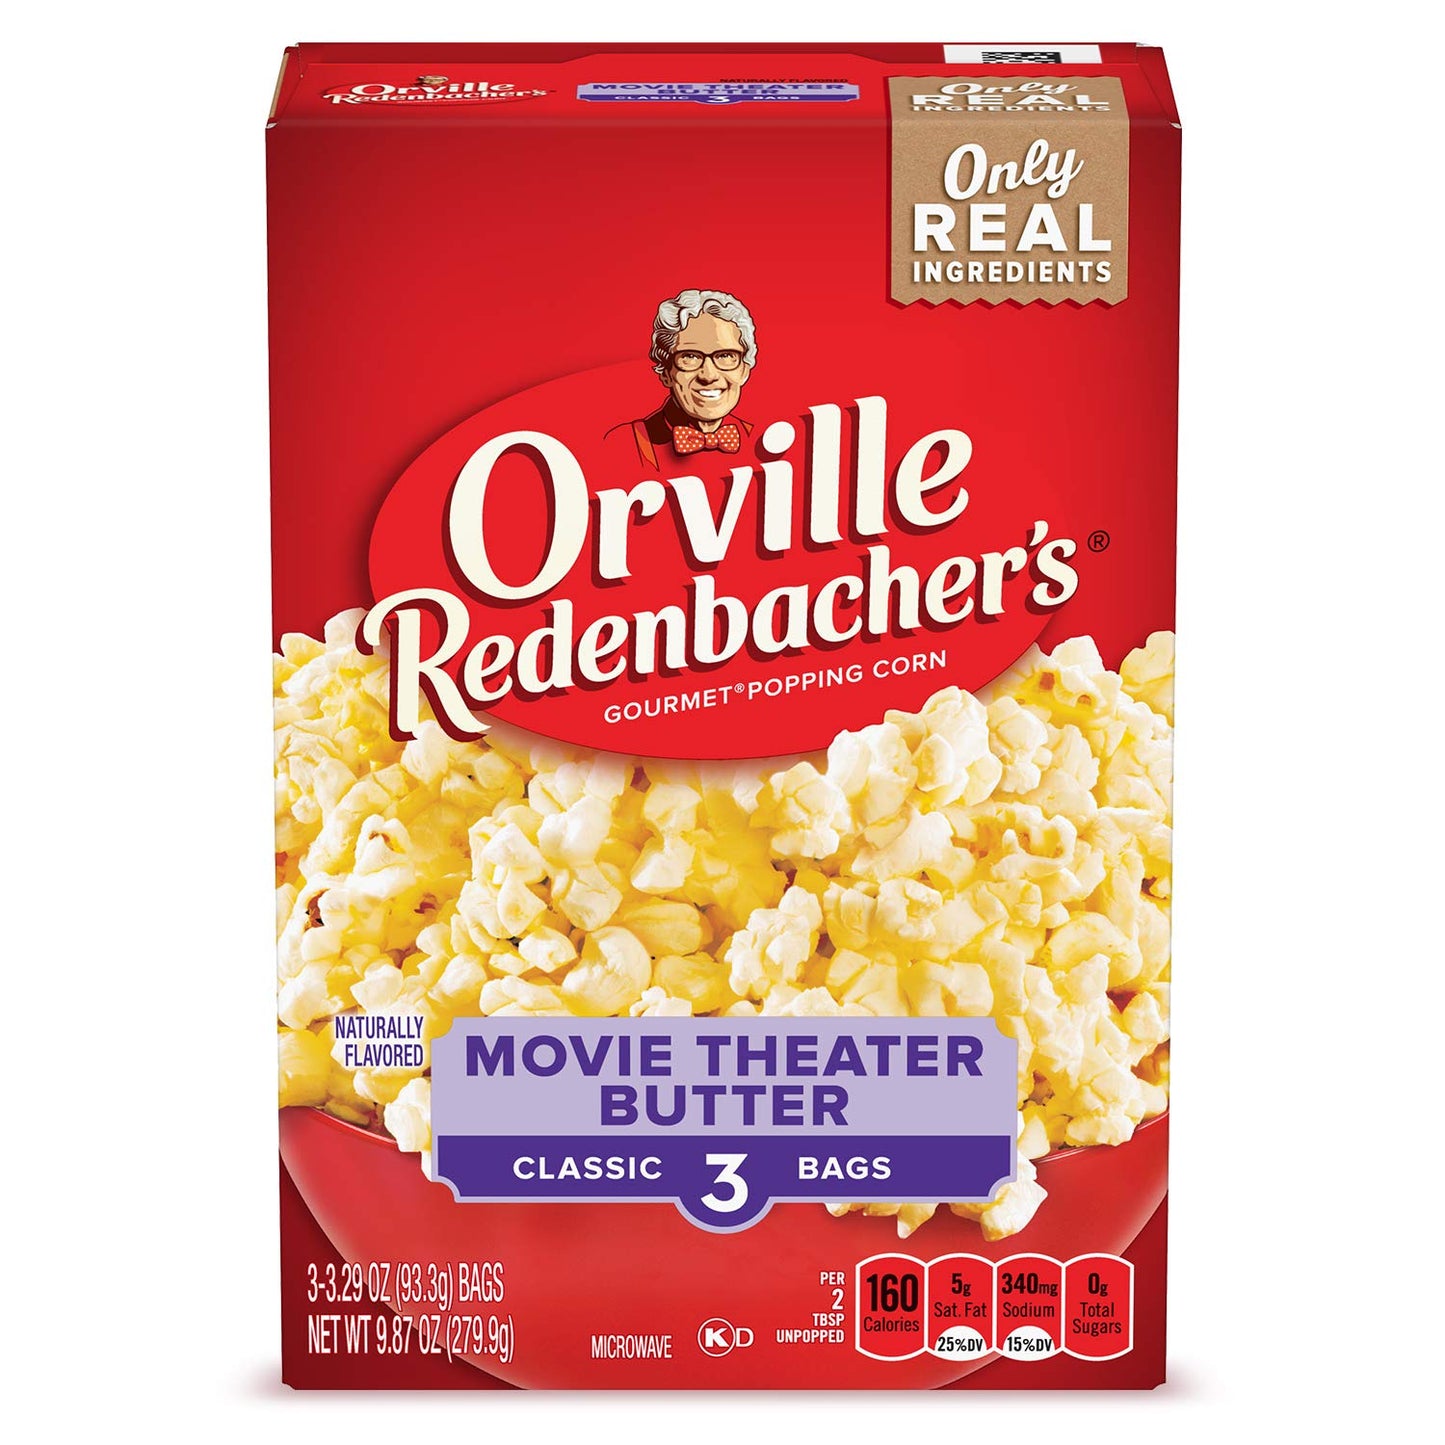 Orville Redenbacher's Movie Theater Butter Microwave Popcorn, (3 ct per bag of 3.29 oz each), 9.87 oz, Pack of 12